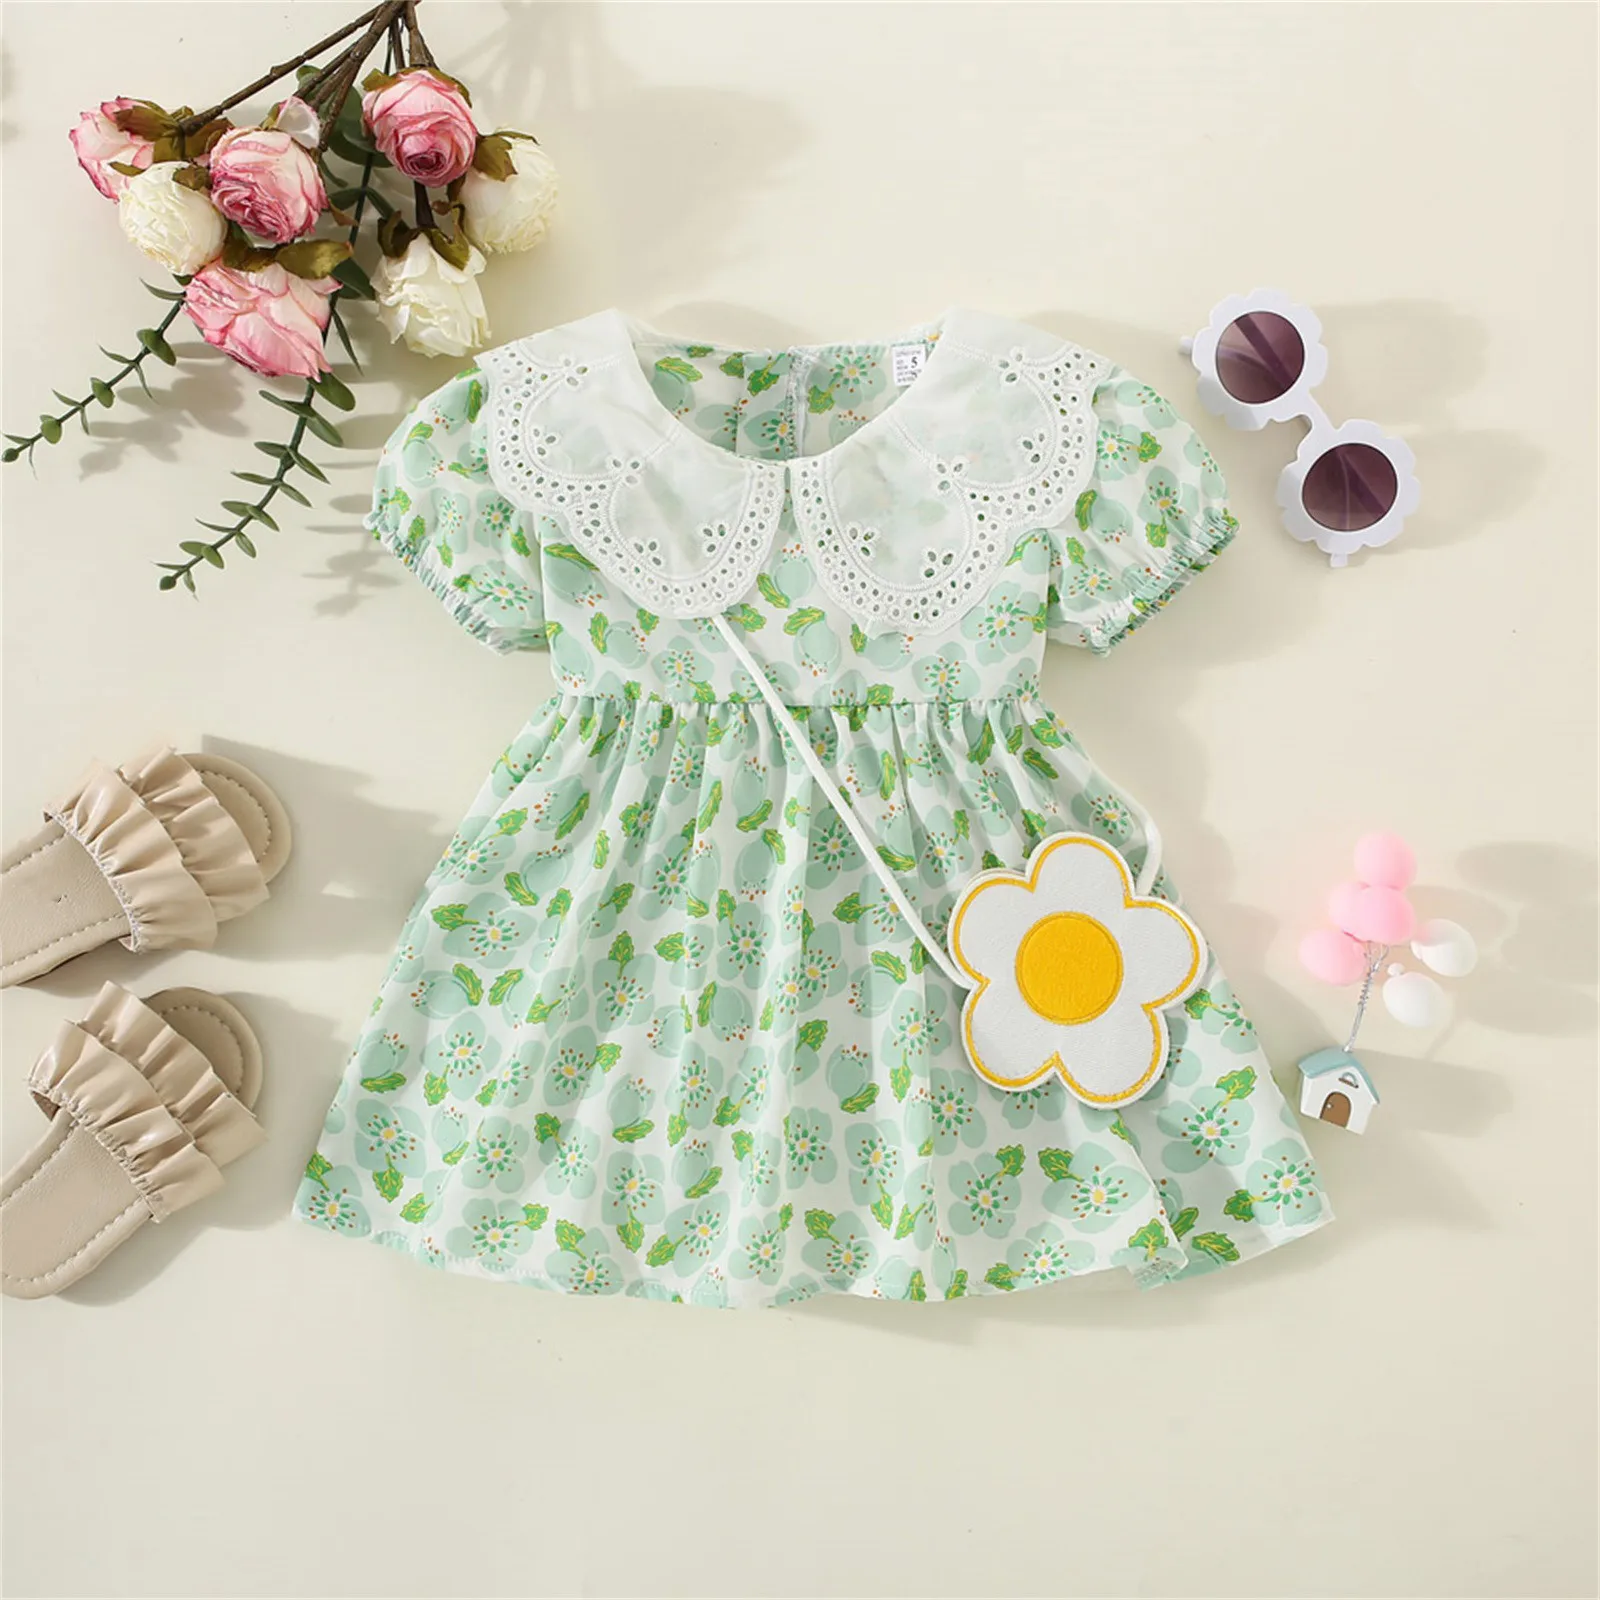 

Baby Girl Flower Dress With Bag Sweet Floral Prints Lace Ruffles Princess Dress Summer Sundress For Girls Toddler 1 2 3 Years